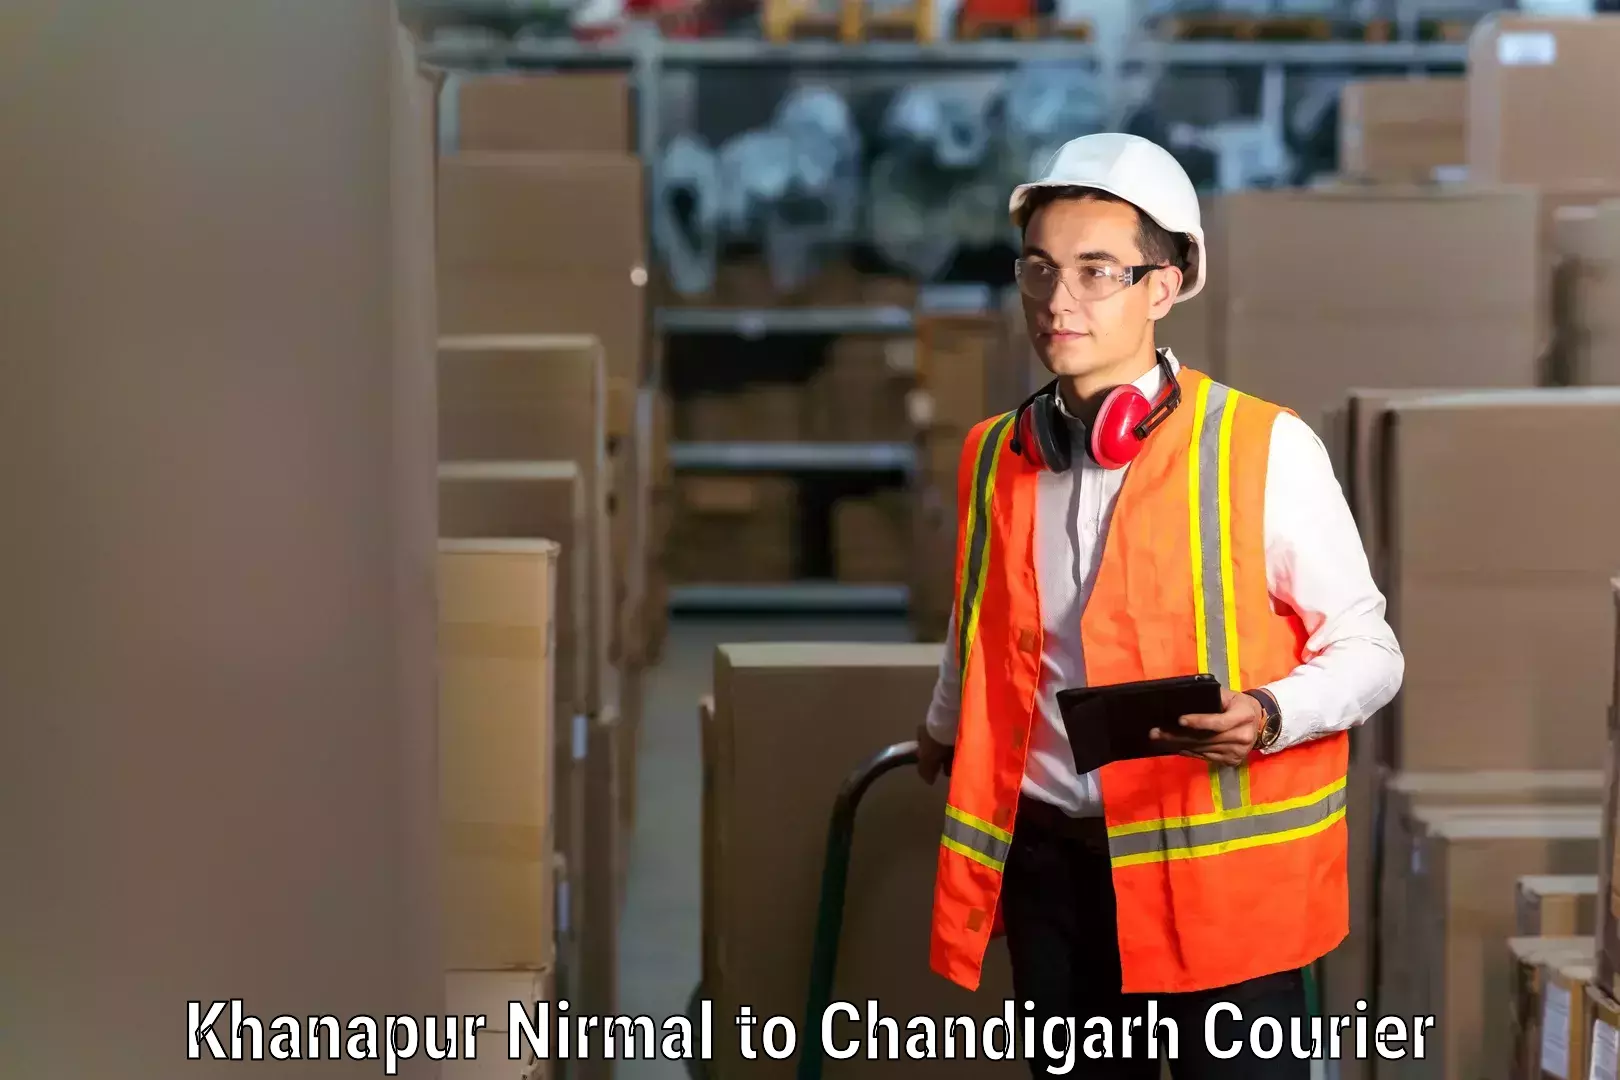 Trusted relocation services Khanapur Nirmal to Chandigarh